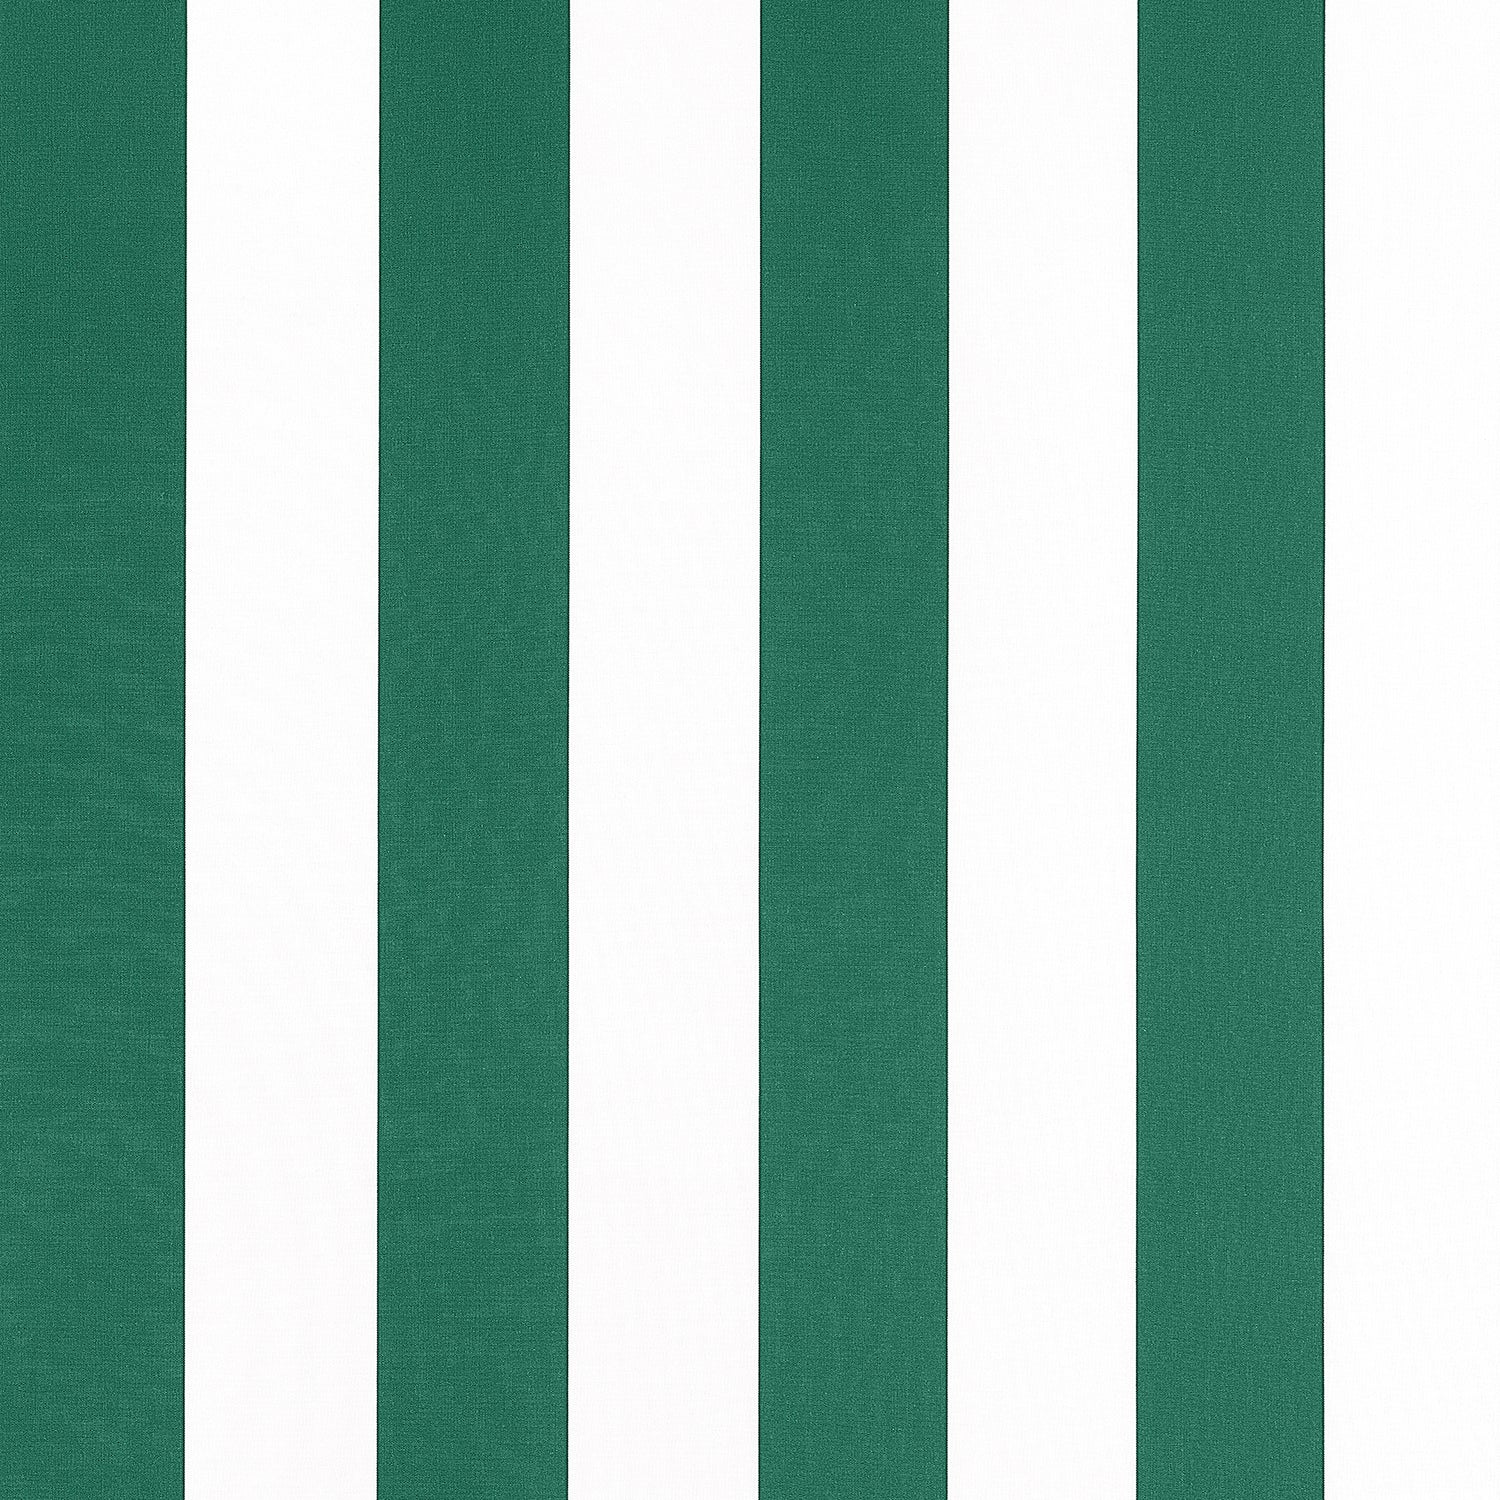 Cabana Stripe fabric in forest color - pattern number W81637 - by Thibaut in the Locale collection